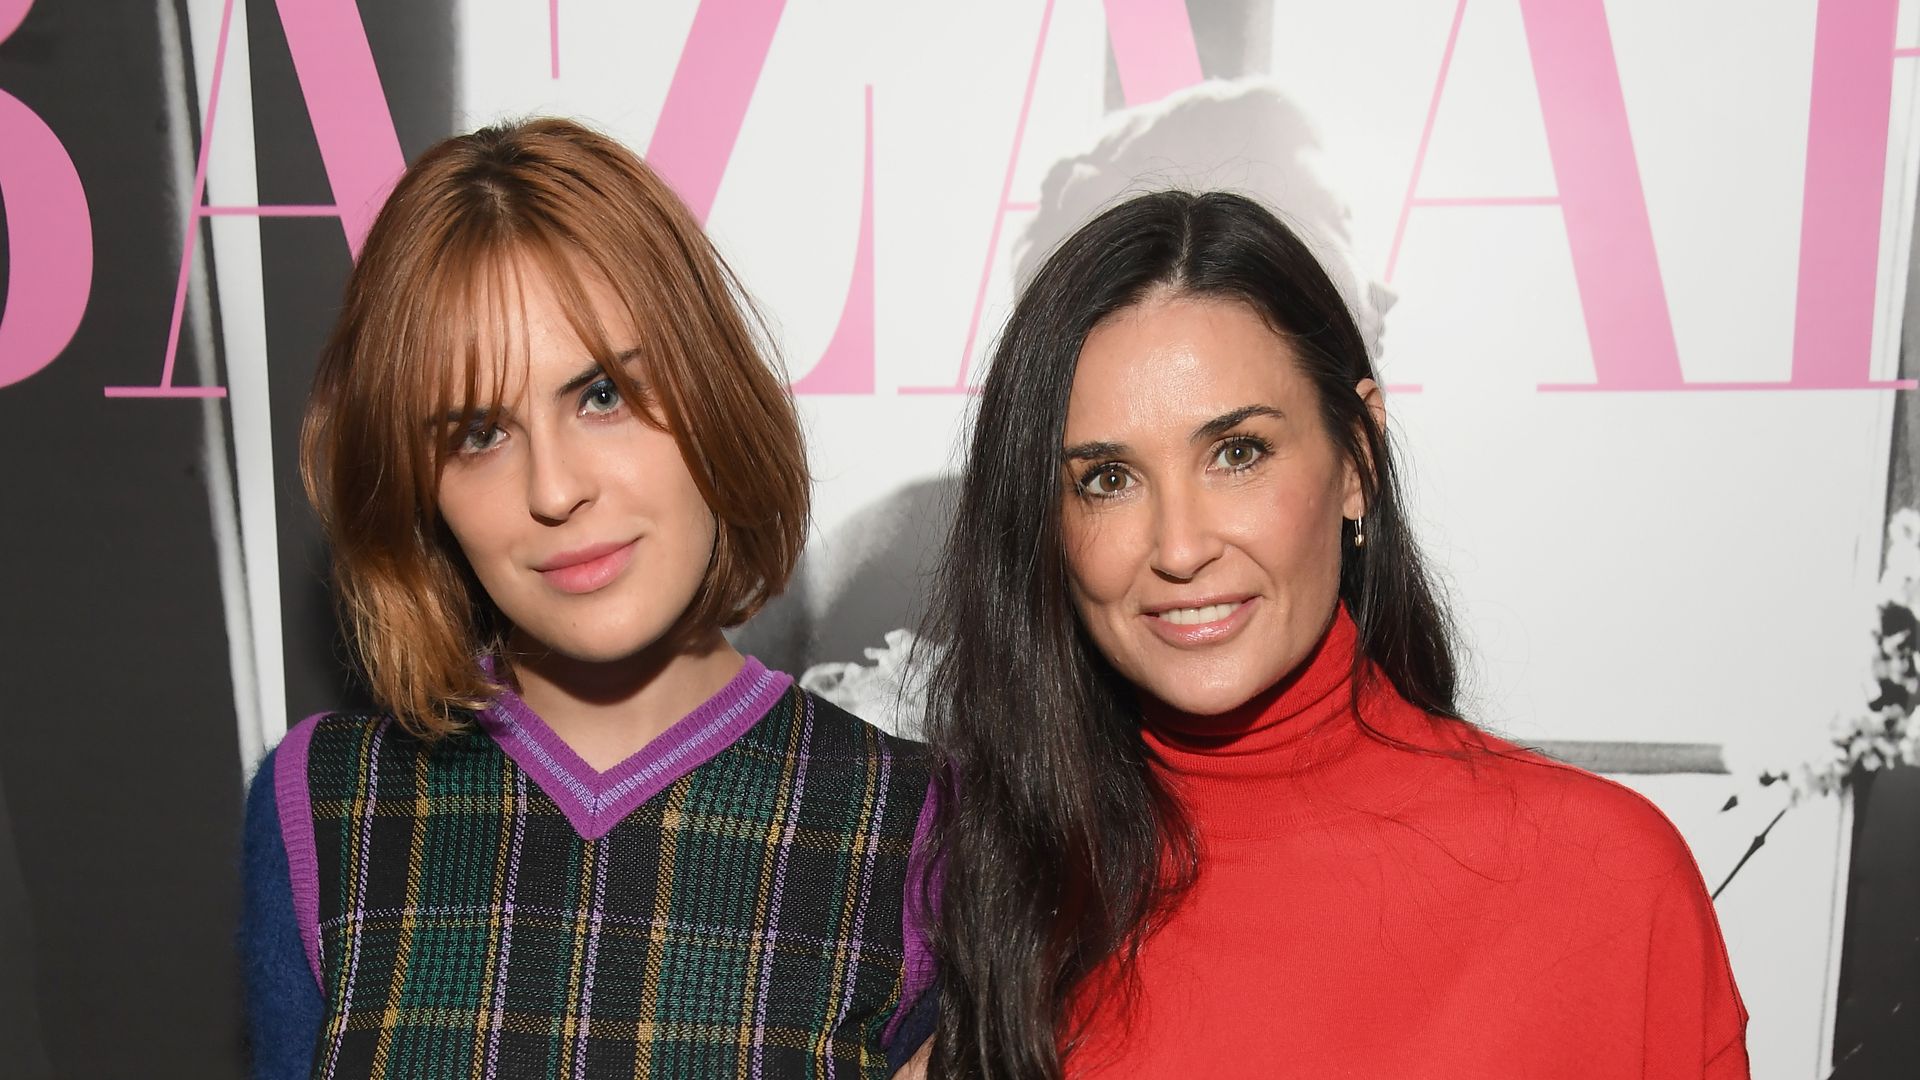 Tallulah Belle Willis and Demi Moore attend Glenda Bailey's Book Launch Celebration at Eric Buterbaugh Los Angeles